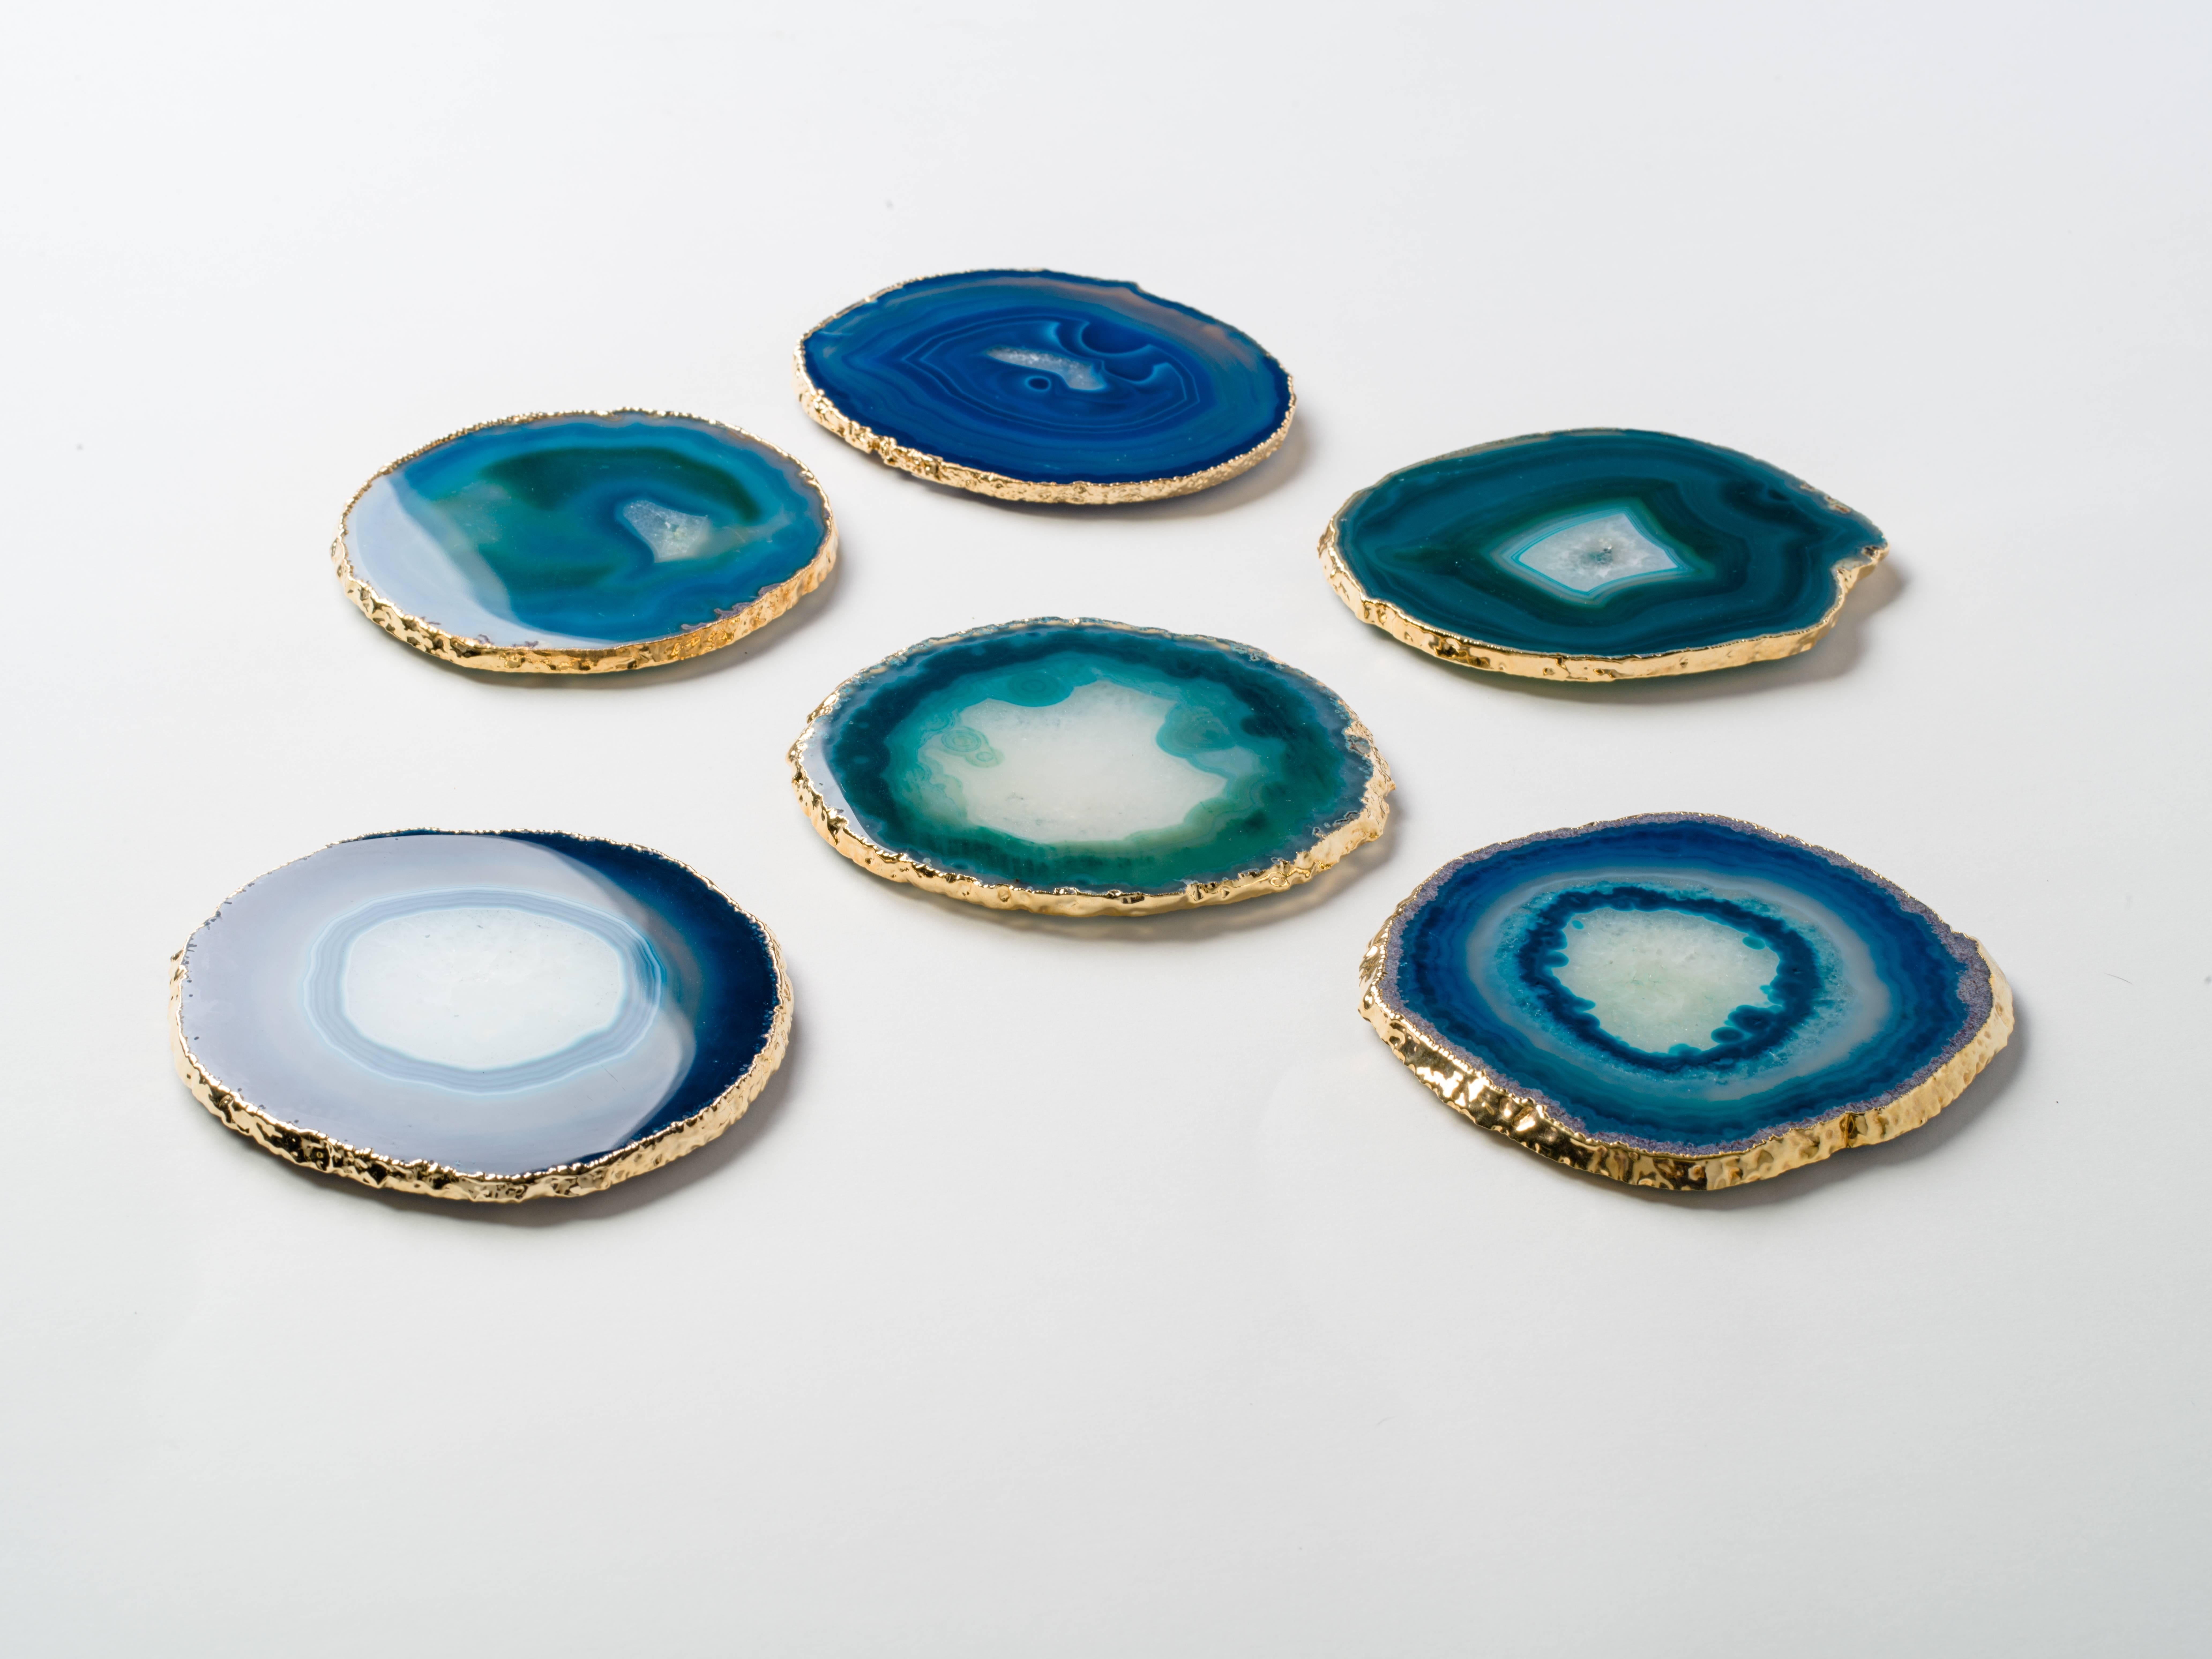 Agate Gemstone Coasters Wrapped in 24-Karat Gold, Set / 8 For Sale 5